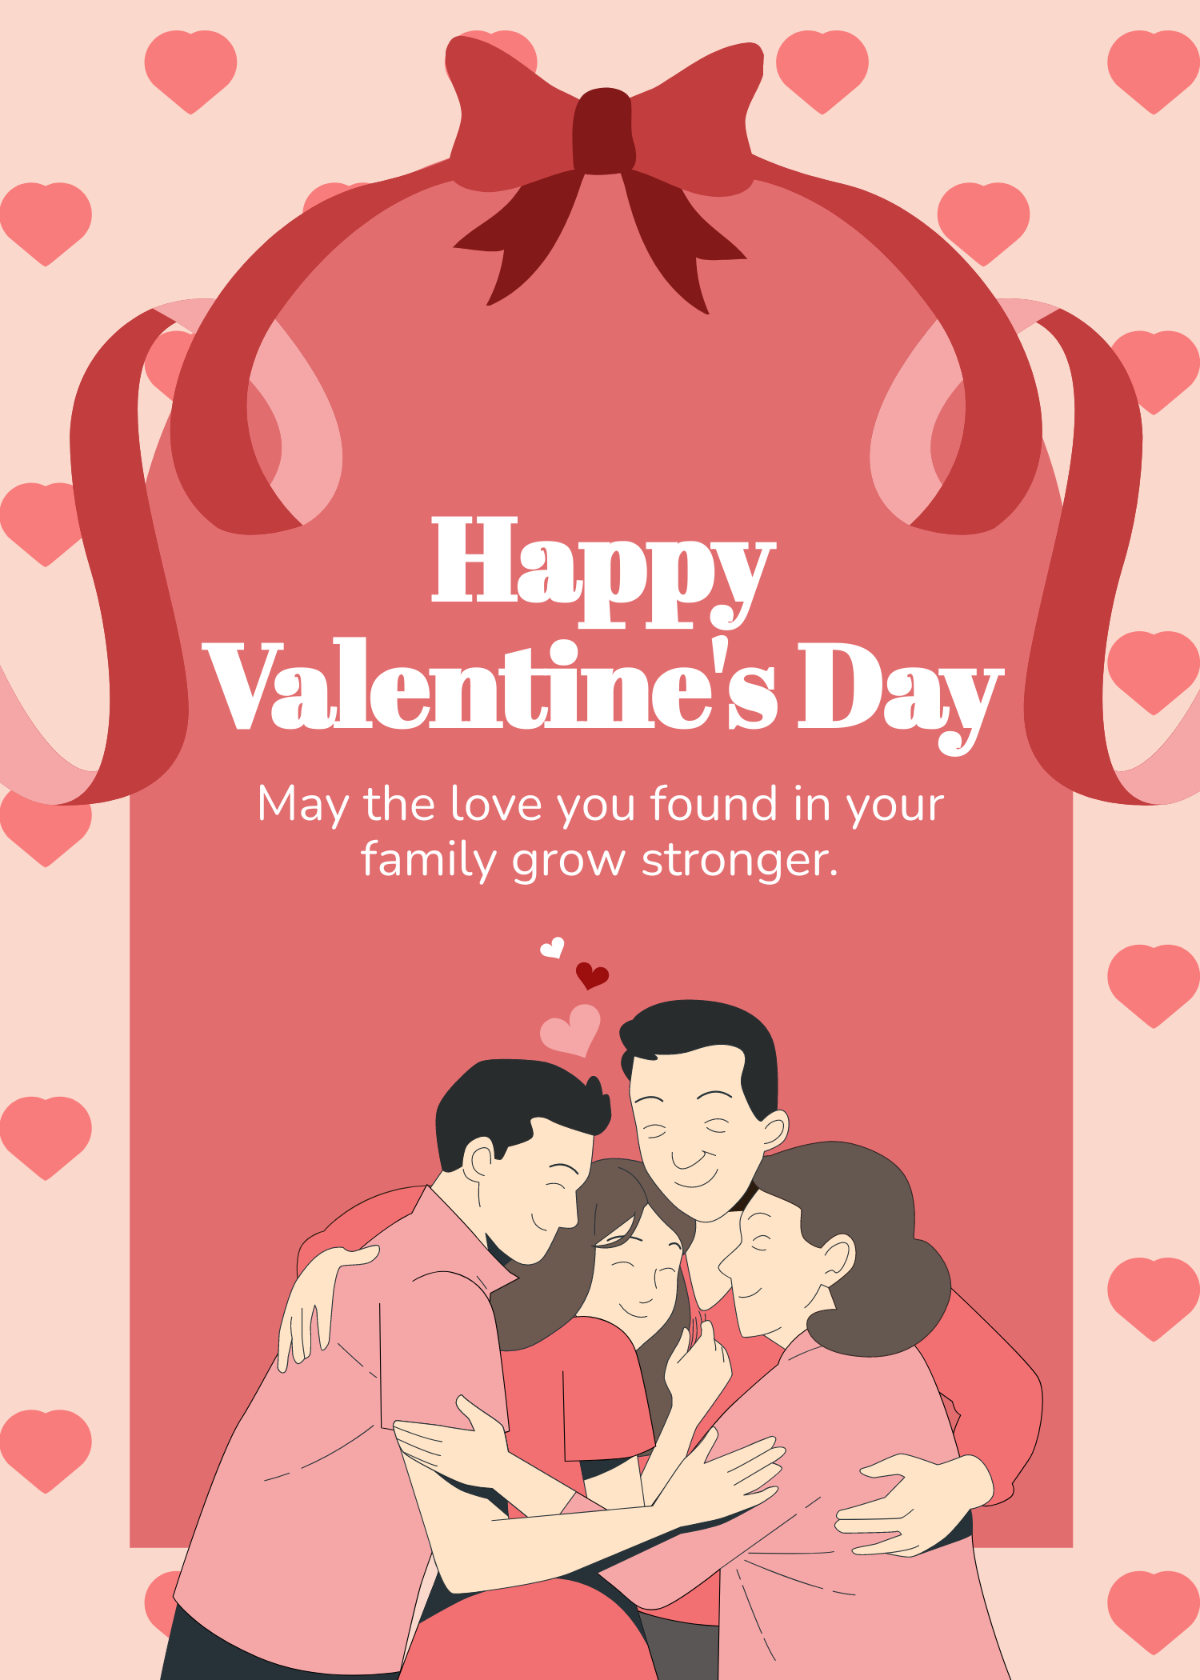 Valentine's Day Wishes for Family Template